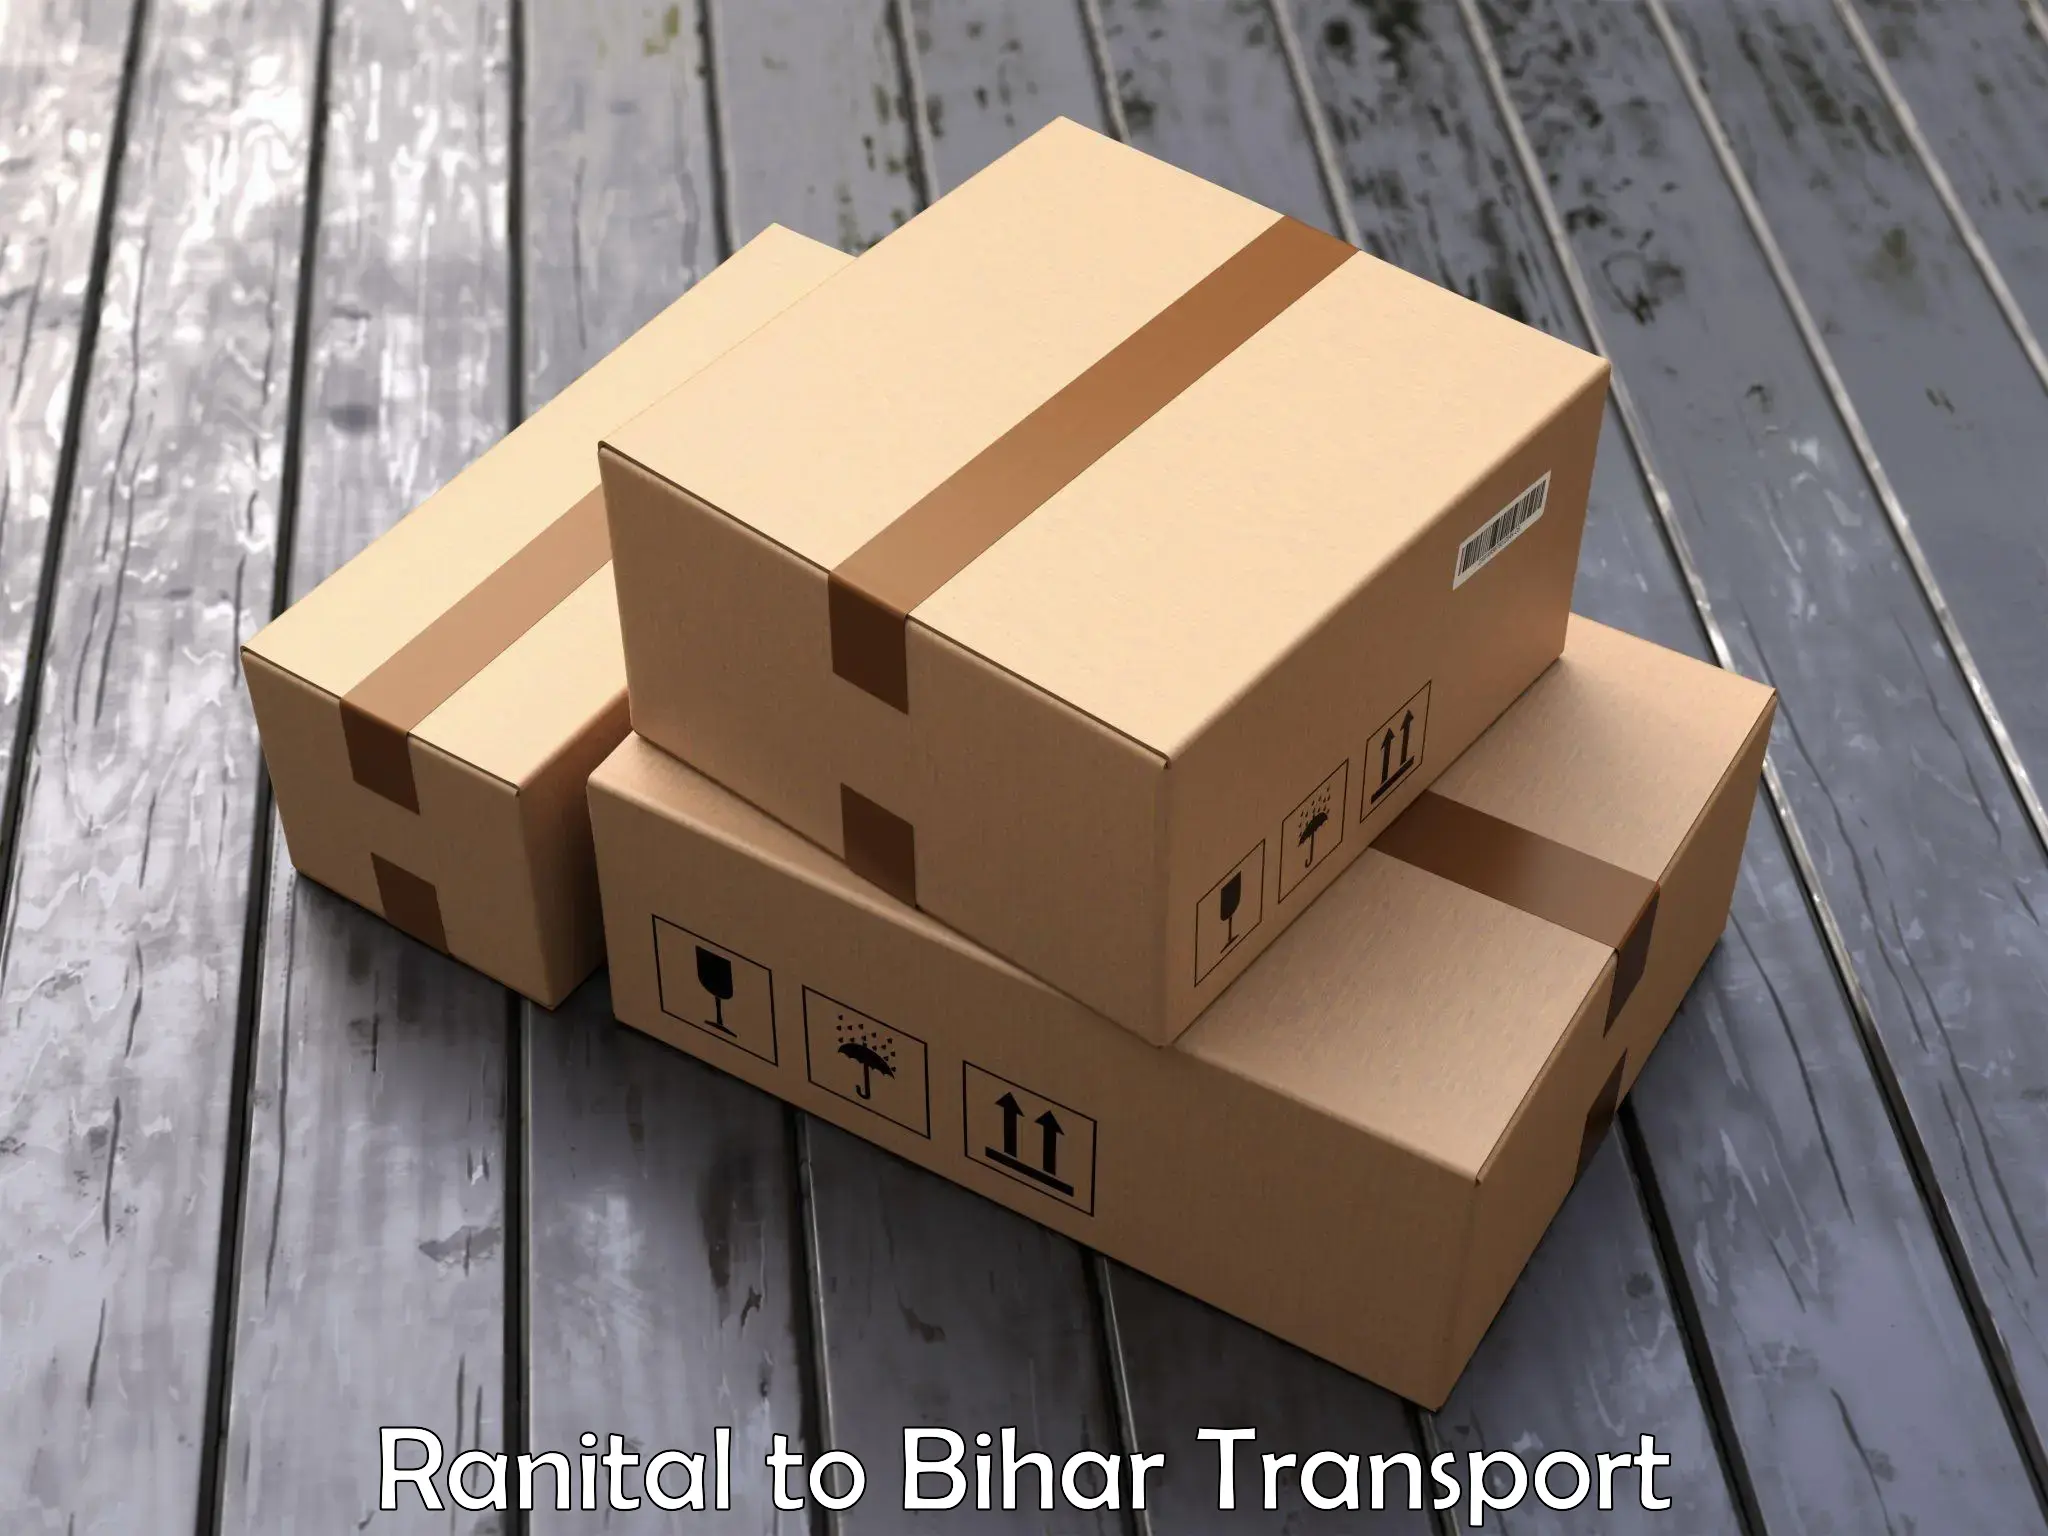 Daily parcel service transport Ranital to Dhaka